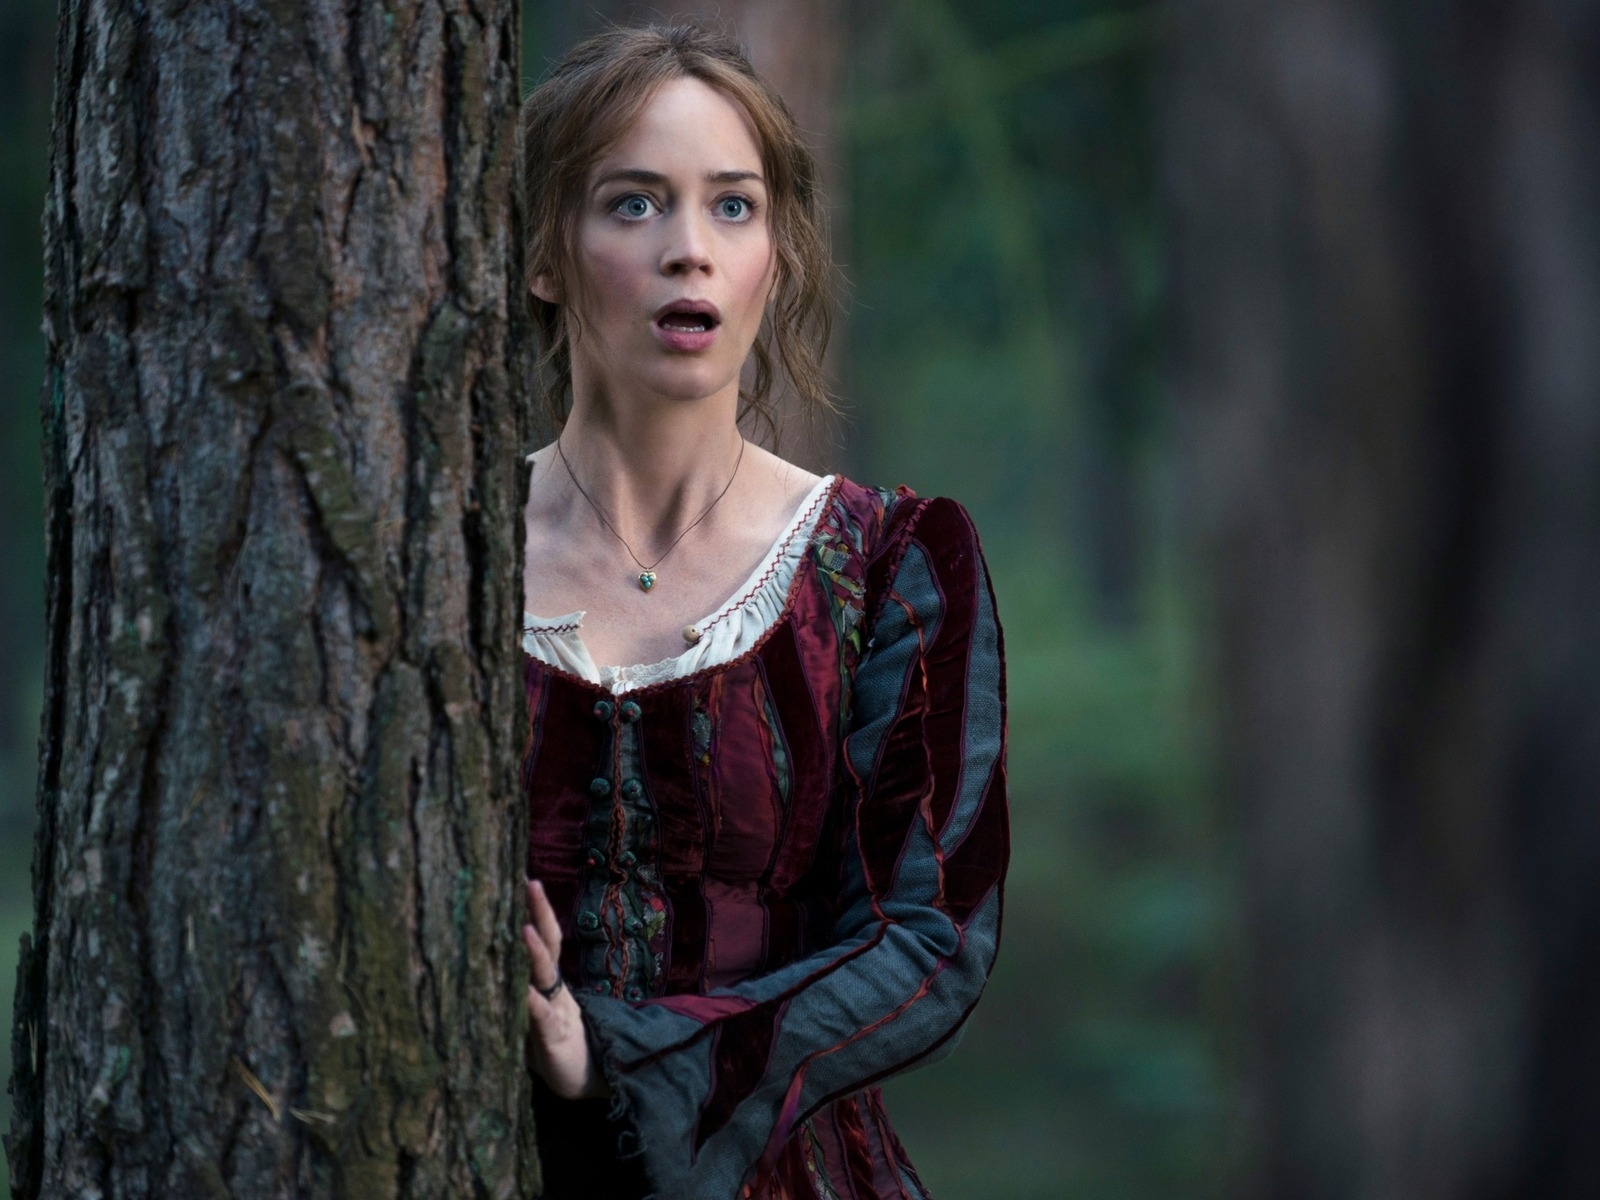 Into the Woods Emily Blunt for 1600 x 1200 resolution